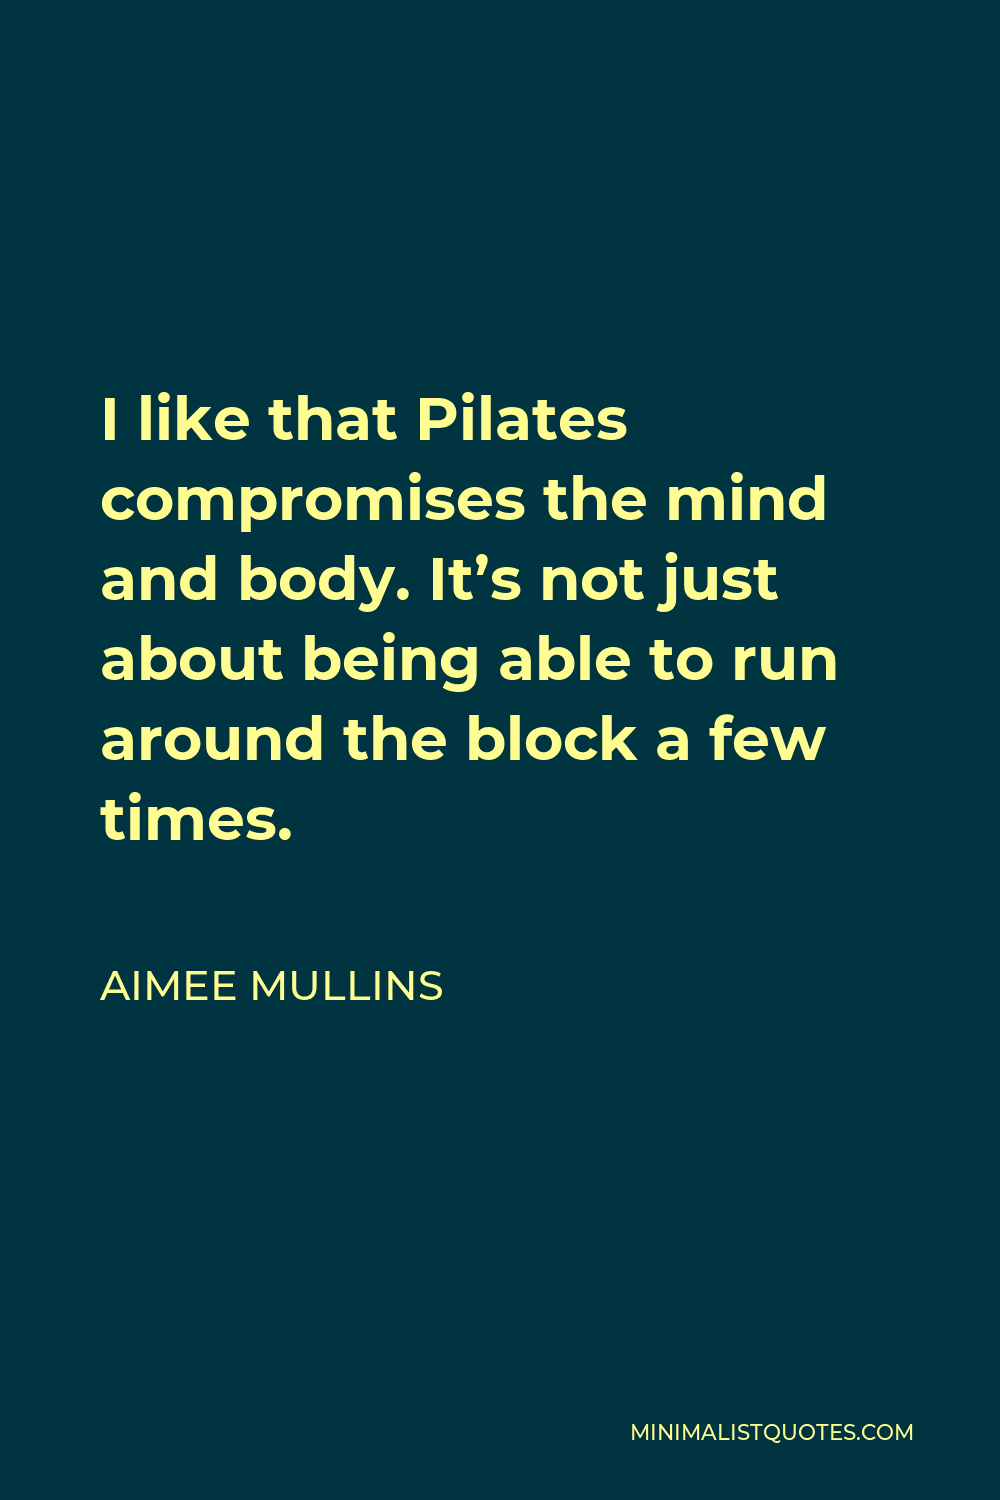 Aimee Mullins Quote - I like that Pilates compromises the mind and body. It’s not just about being able to run around the block a few times.